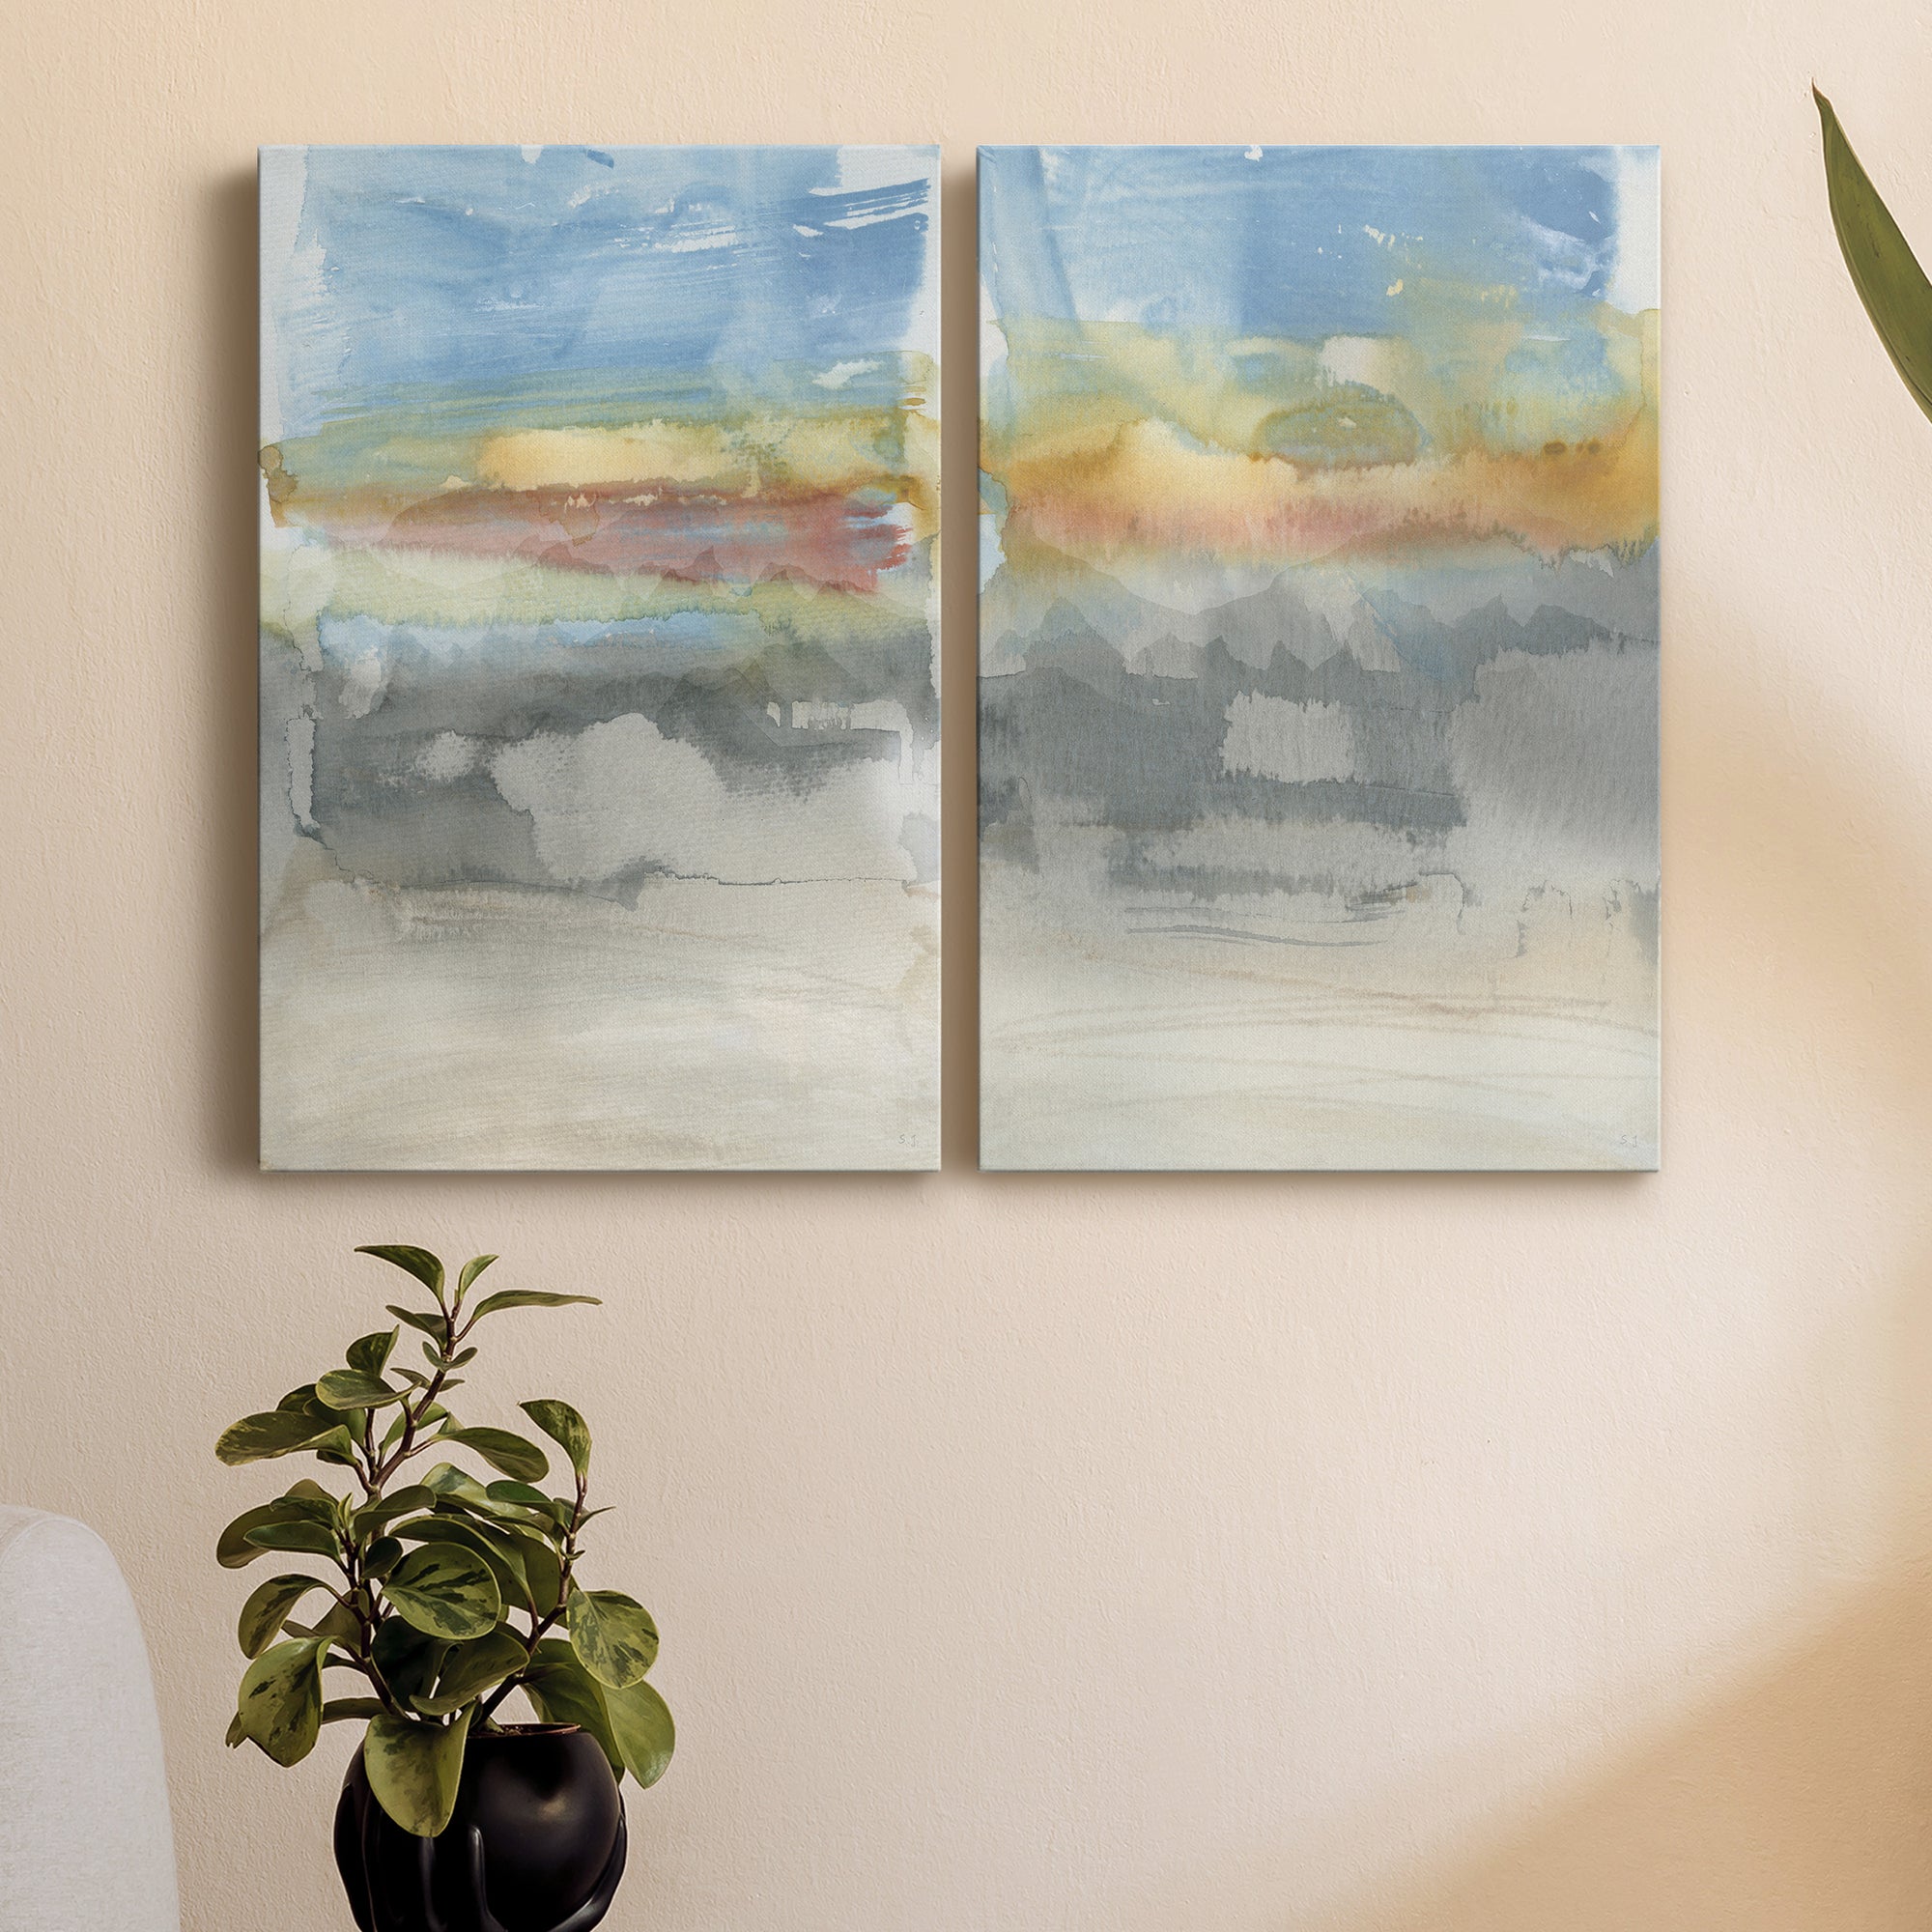 High Desert Sunset I Premium Gallery Wrapped Canvas - Ready to Hang - Set of 2 - 8 x 12 Each